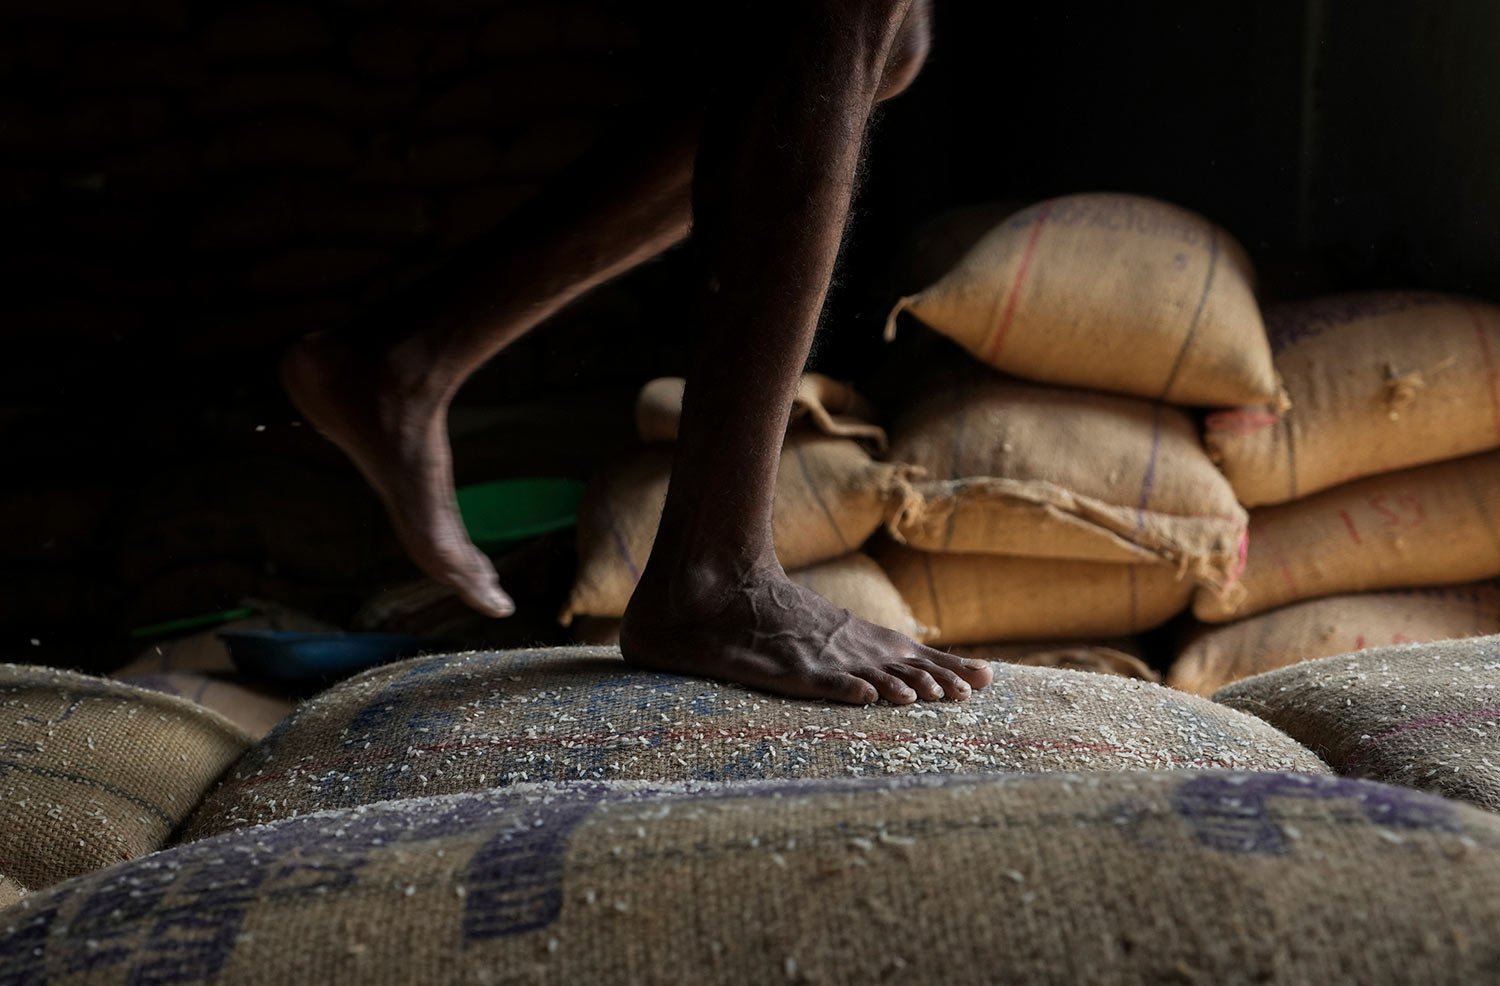  A worker walks on rice bags while unloading them at a warehouse in Hyderabad, India, Wednesday, Feb. 1, 2023.  (AP Photo/Mahesh Kumar A.) 